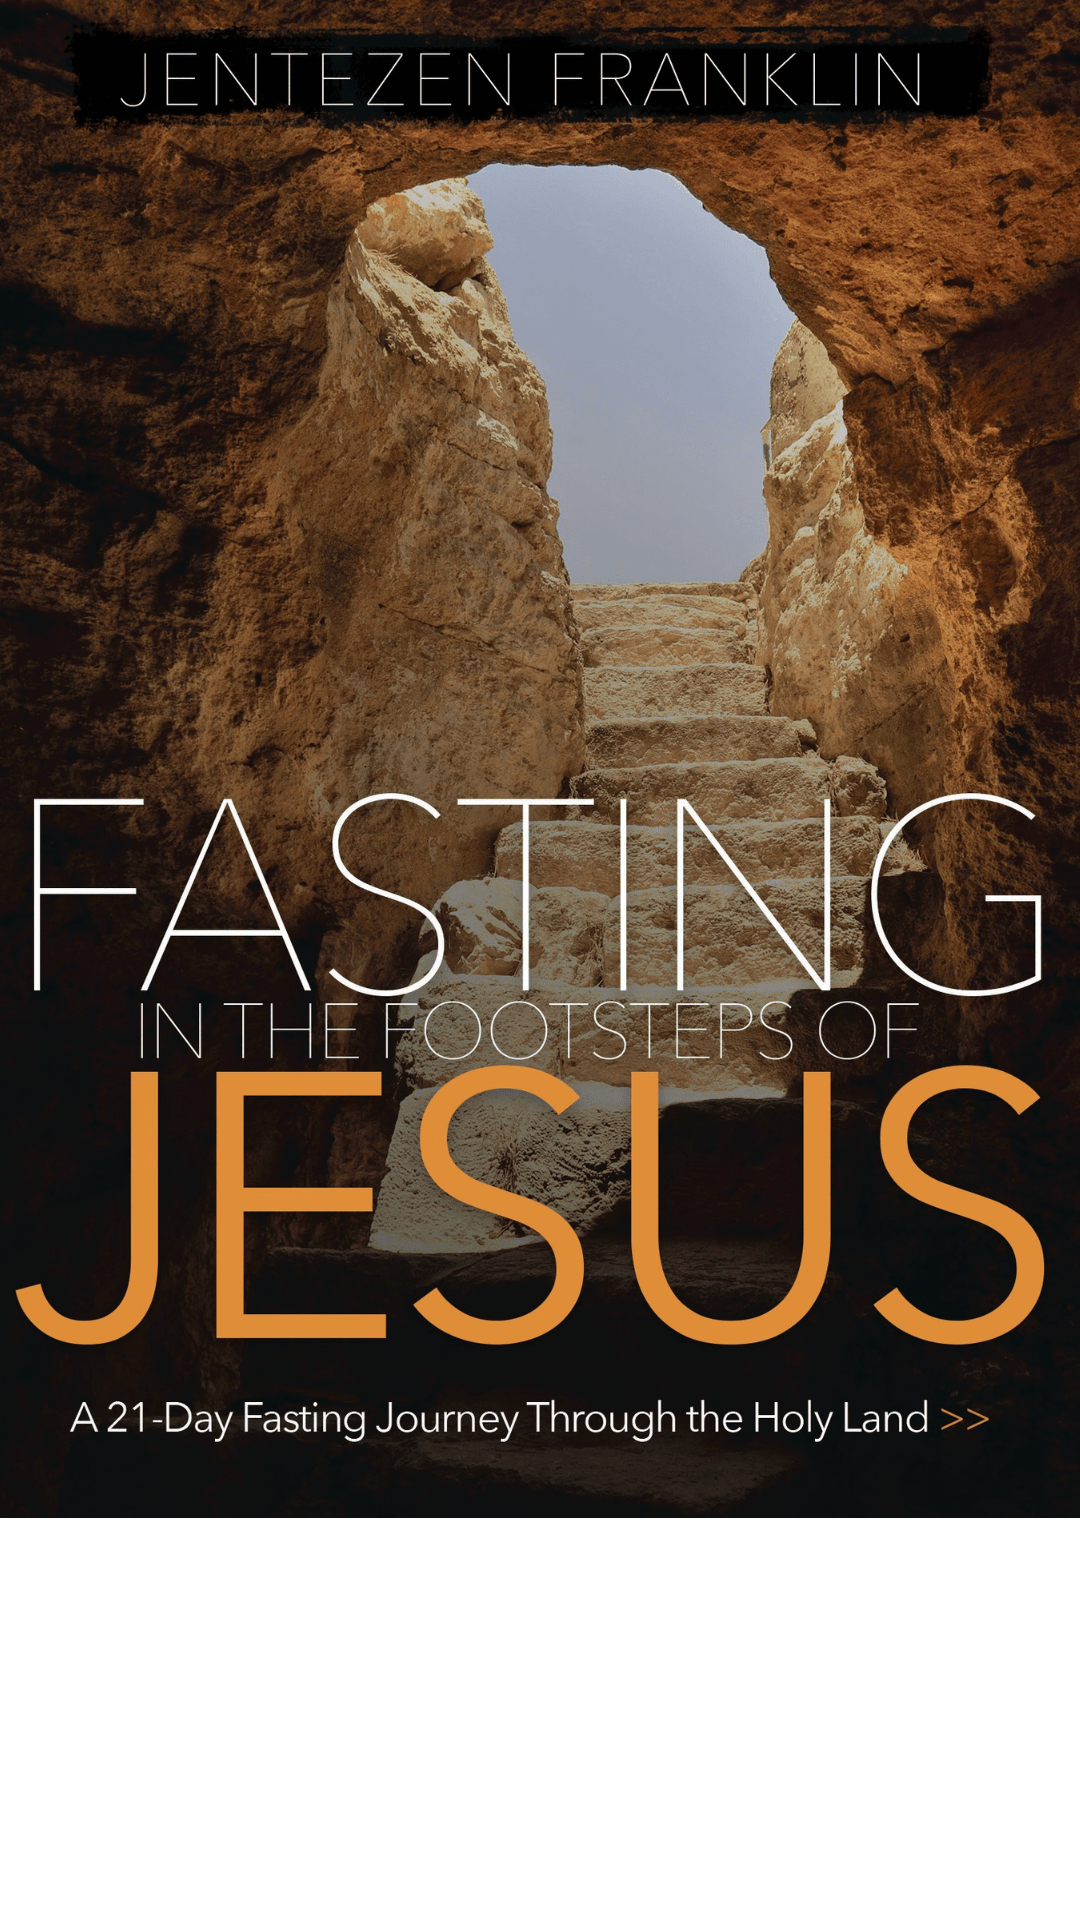 Fasting in The Footsteps of Jesus